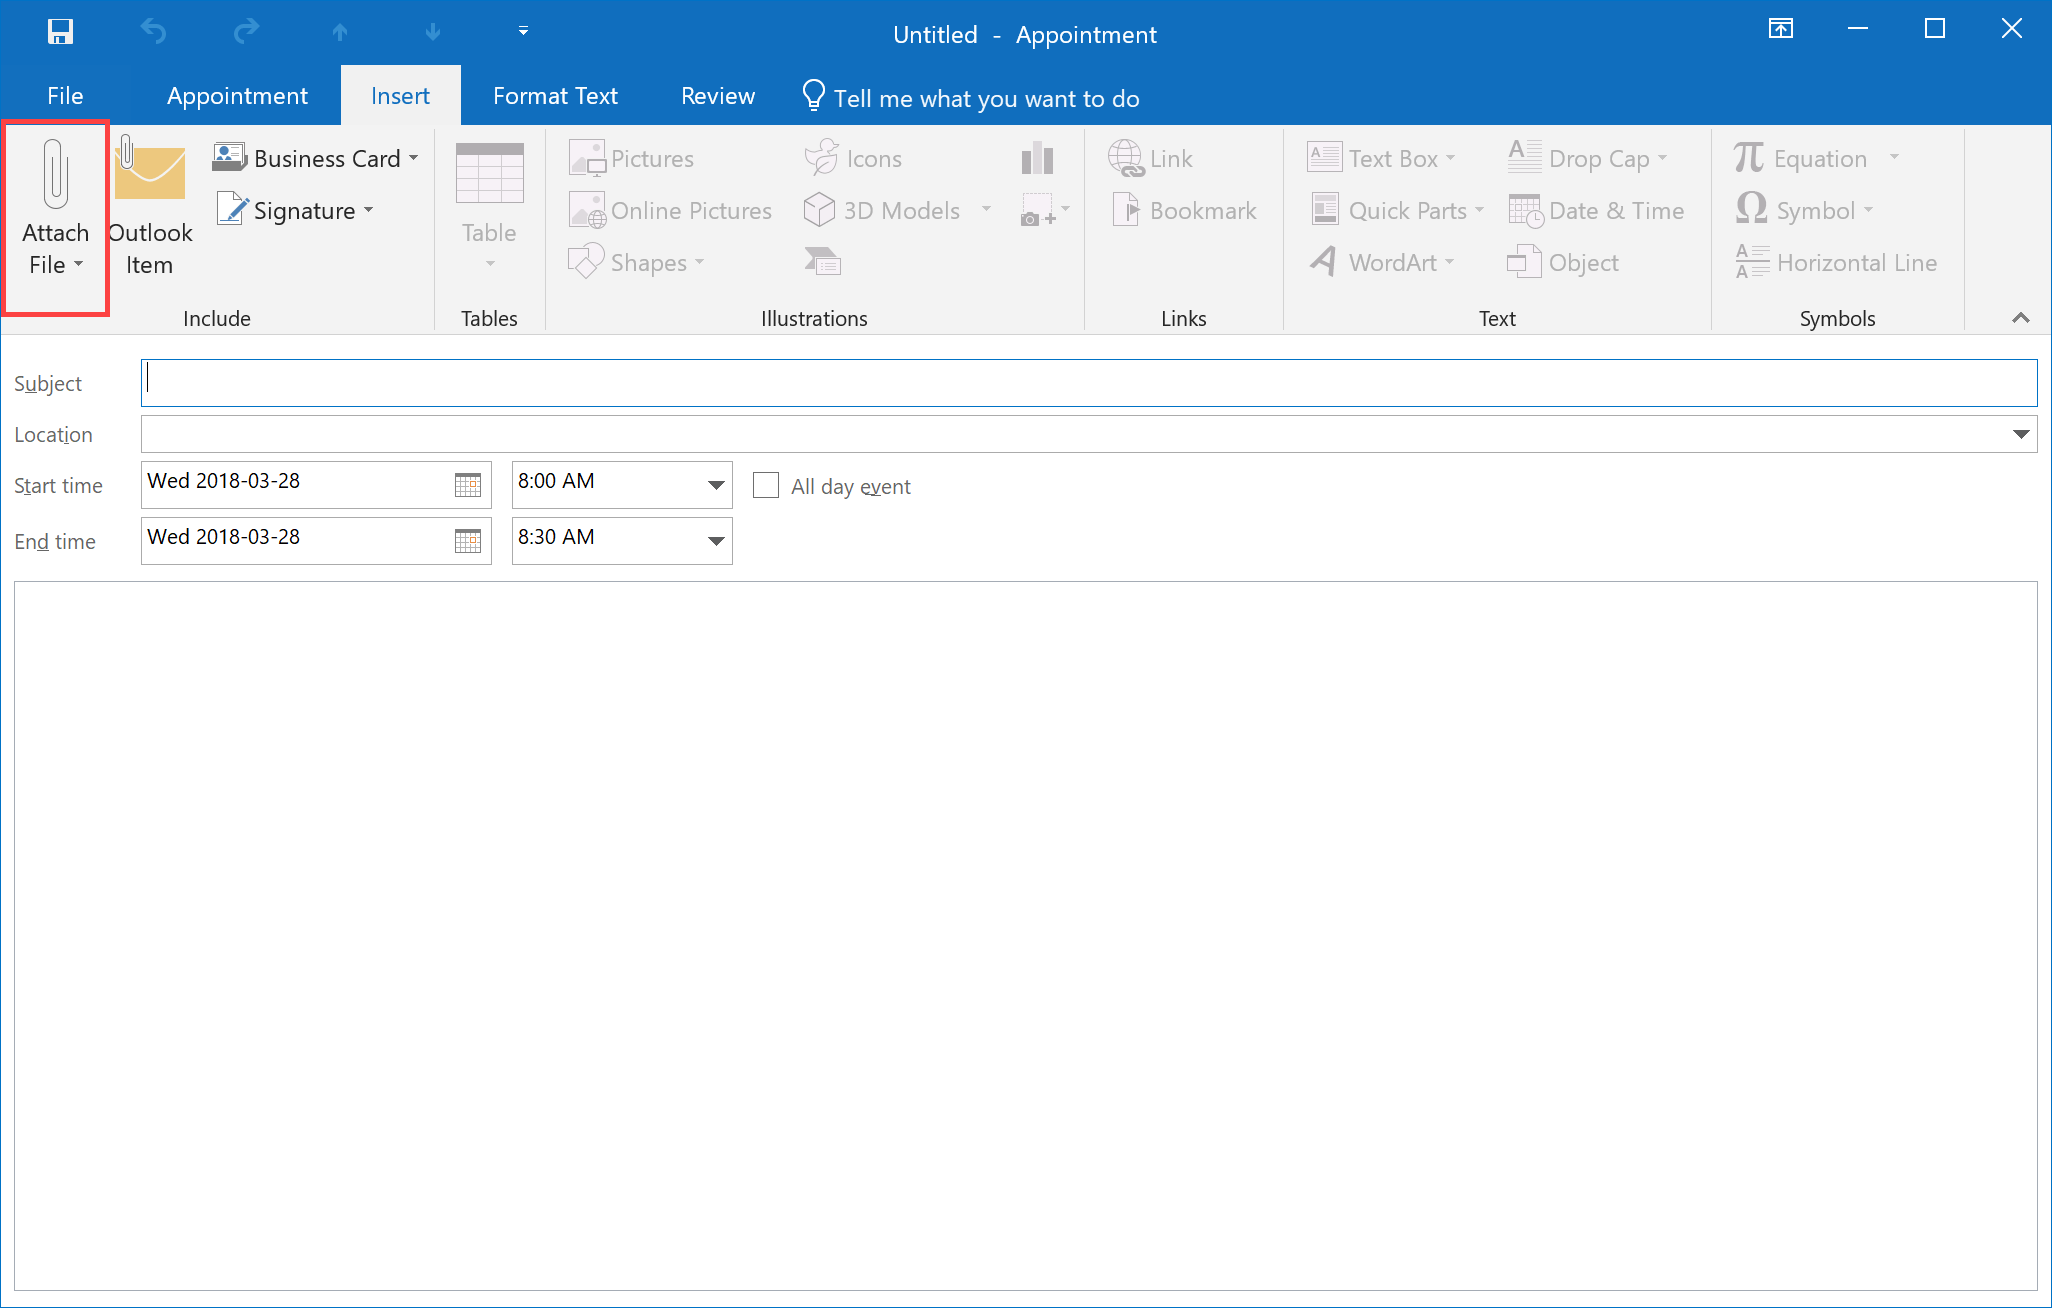 How to attach a file to a meeting invitation in Outlook